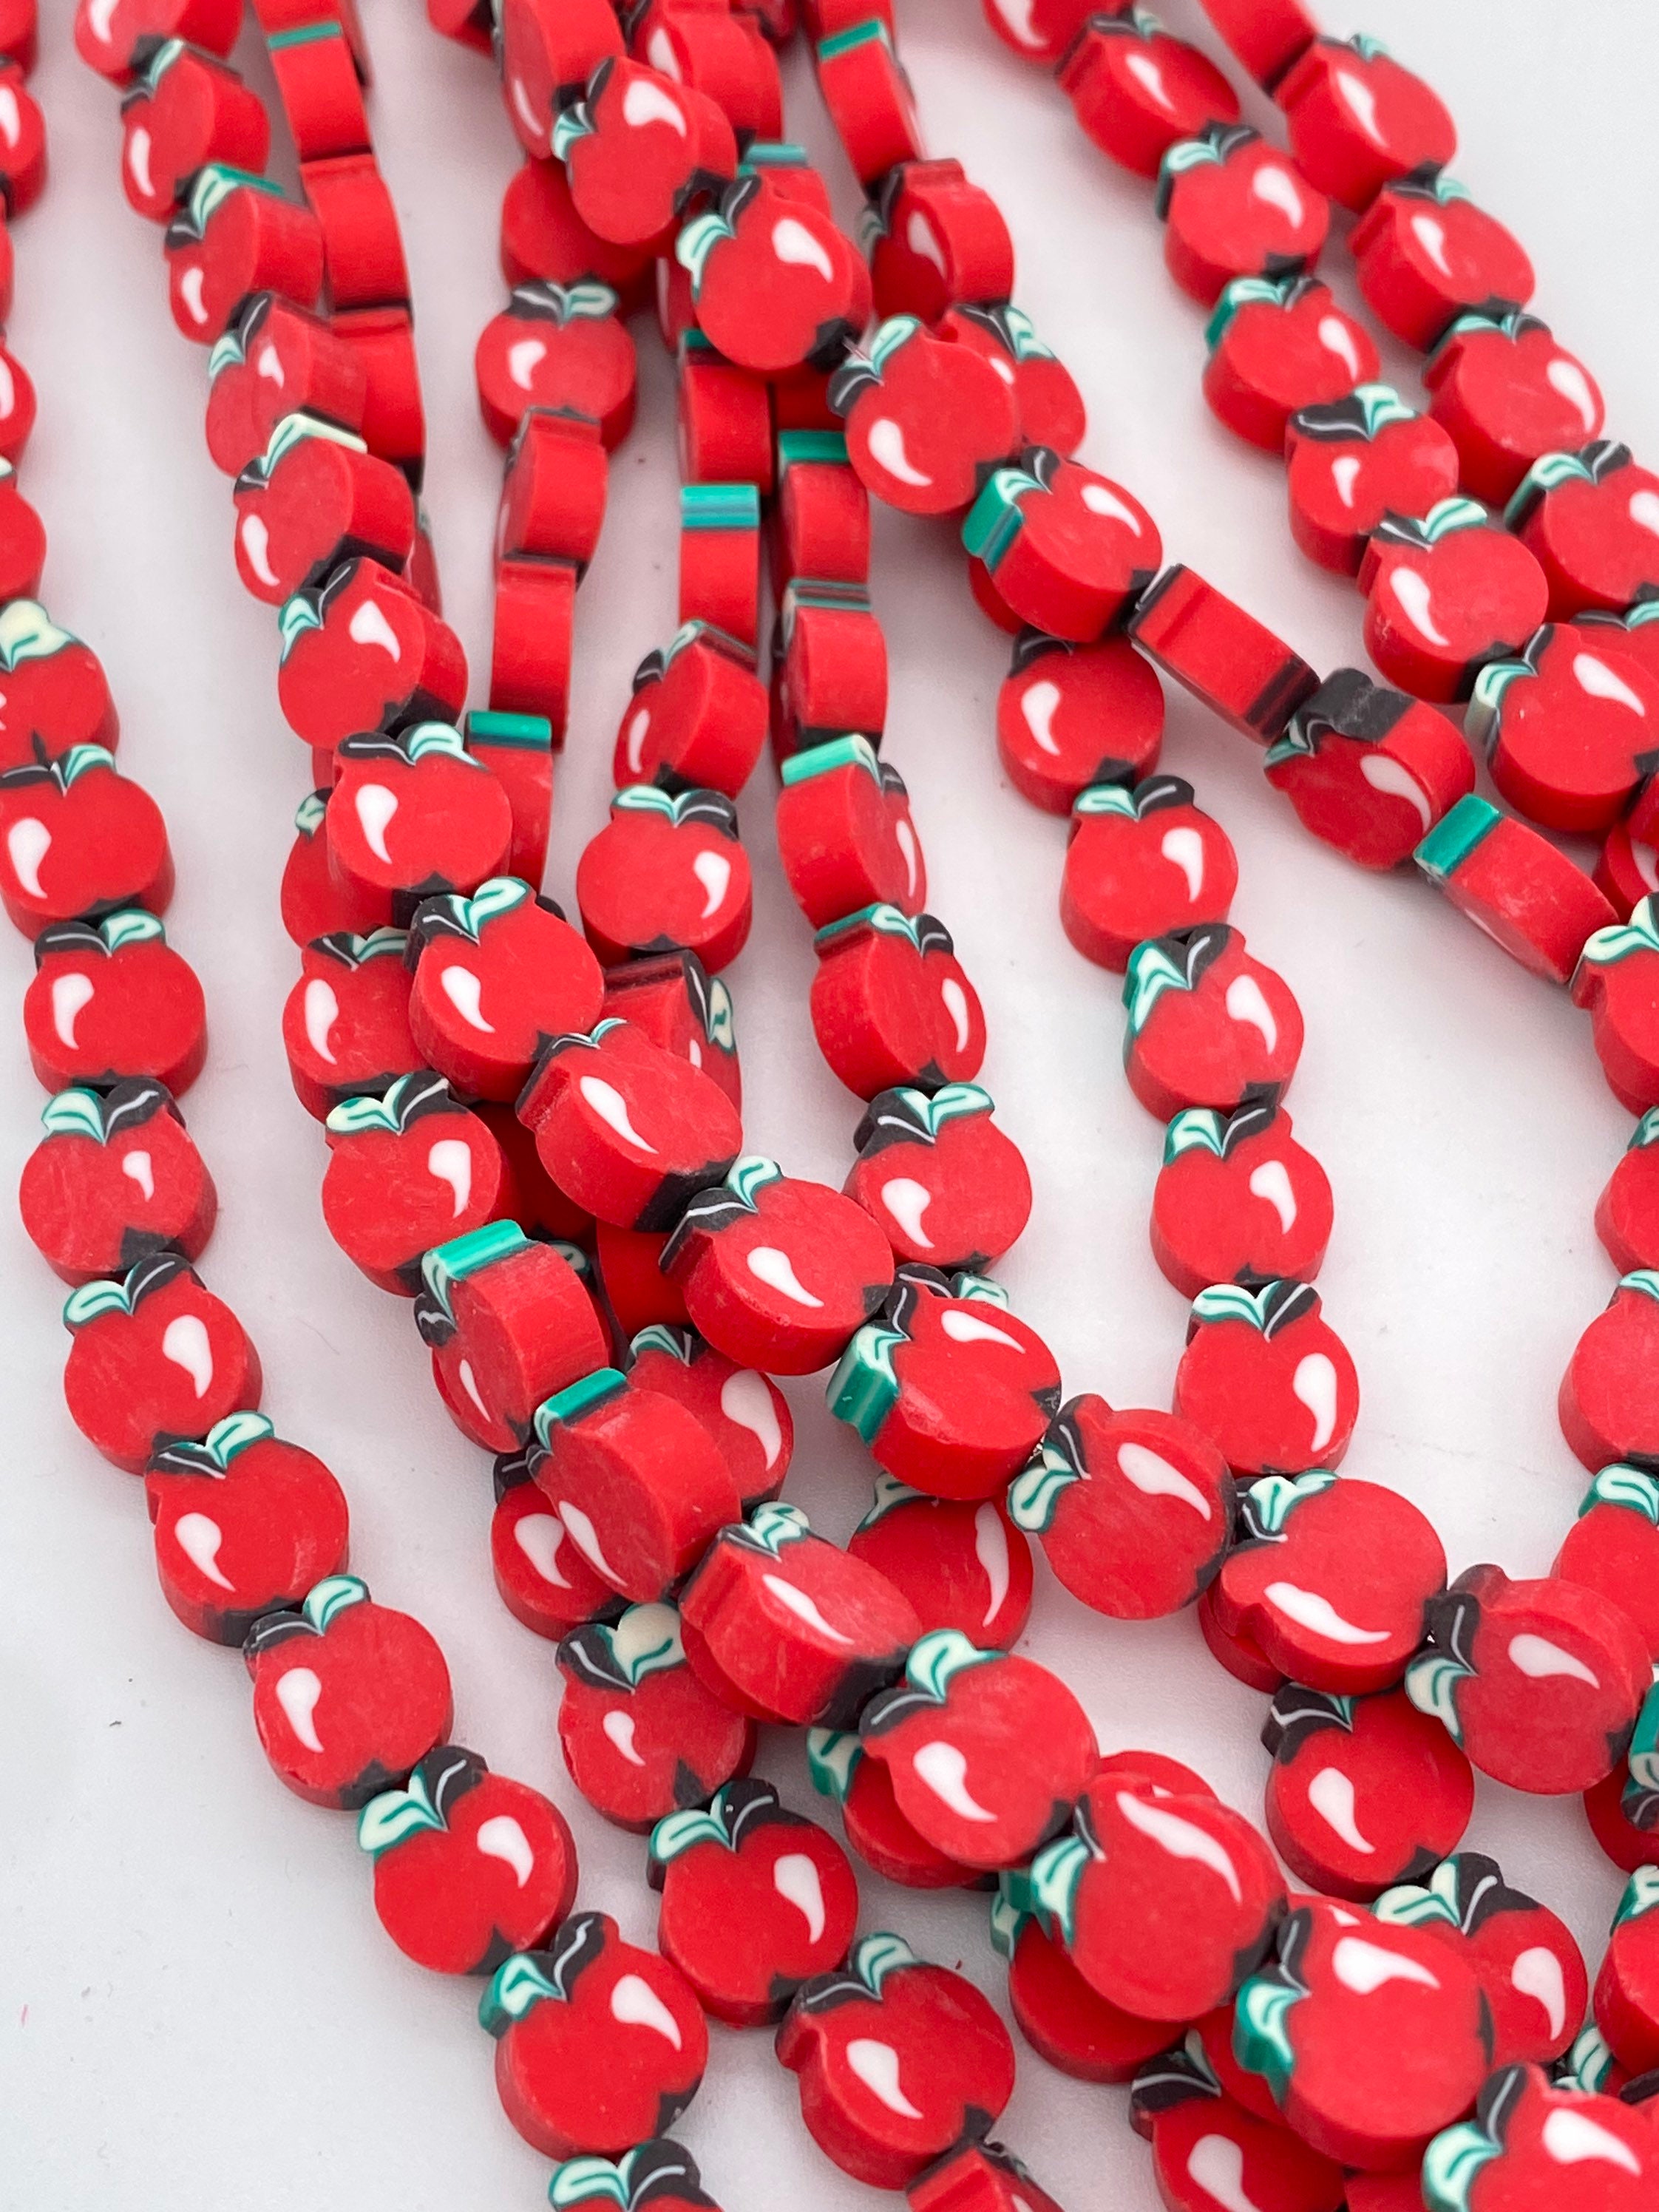 Polymer Clay Beads Red Clay Beads Berry Beads Beads 